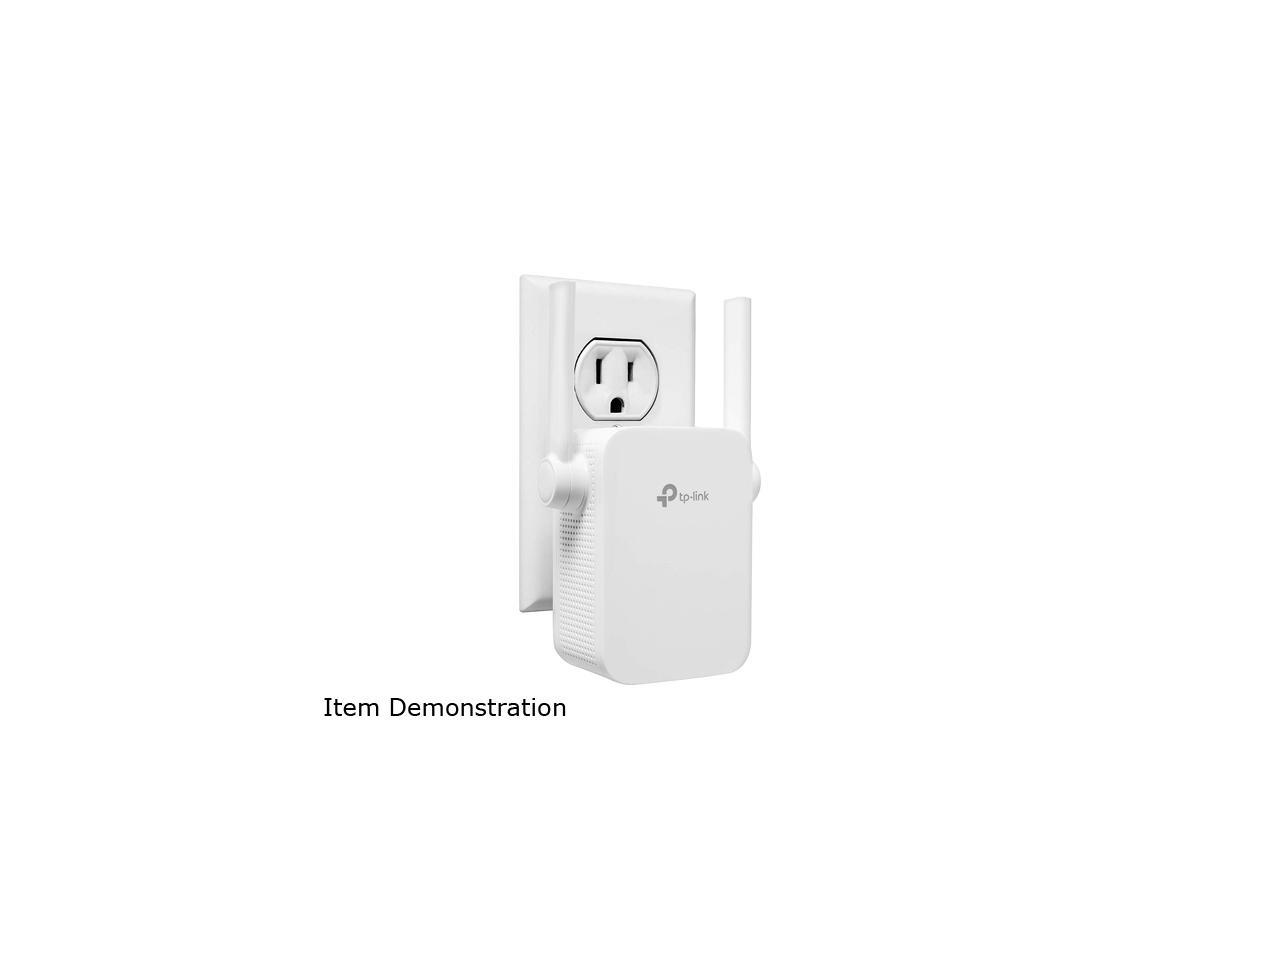 TP-LINK TL-WA855RE N300 Wi-Fi Wall Plug Range Extender / Repeater / Access Point